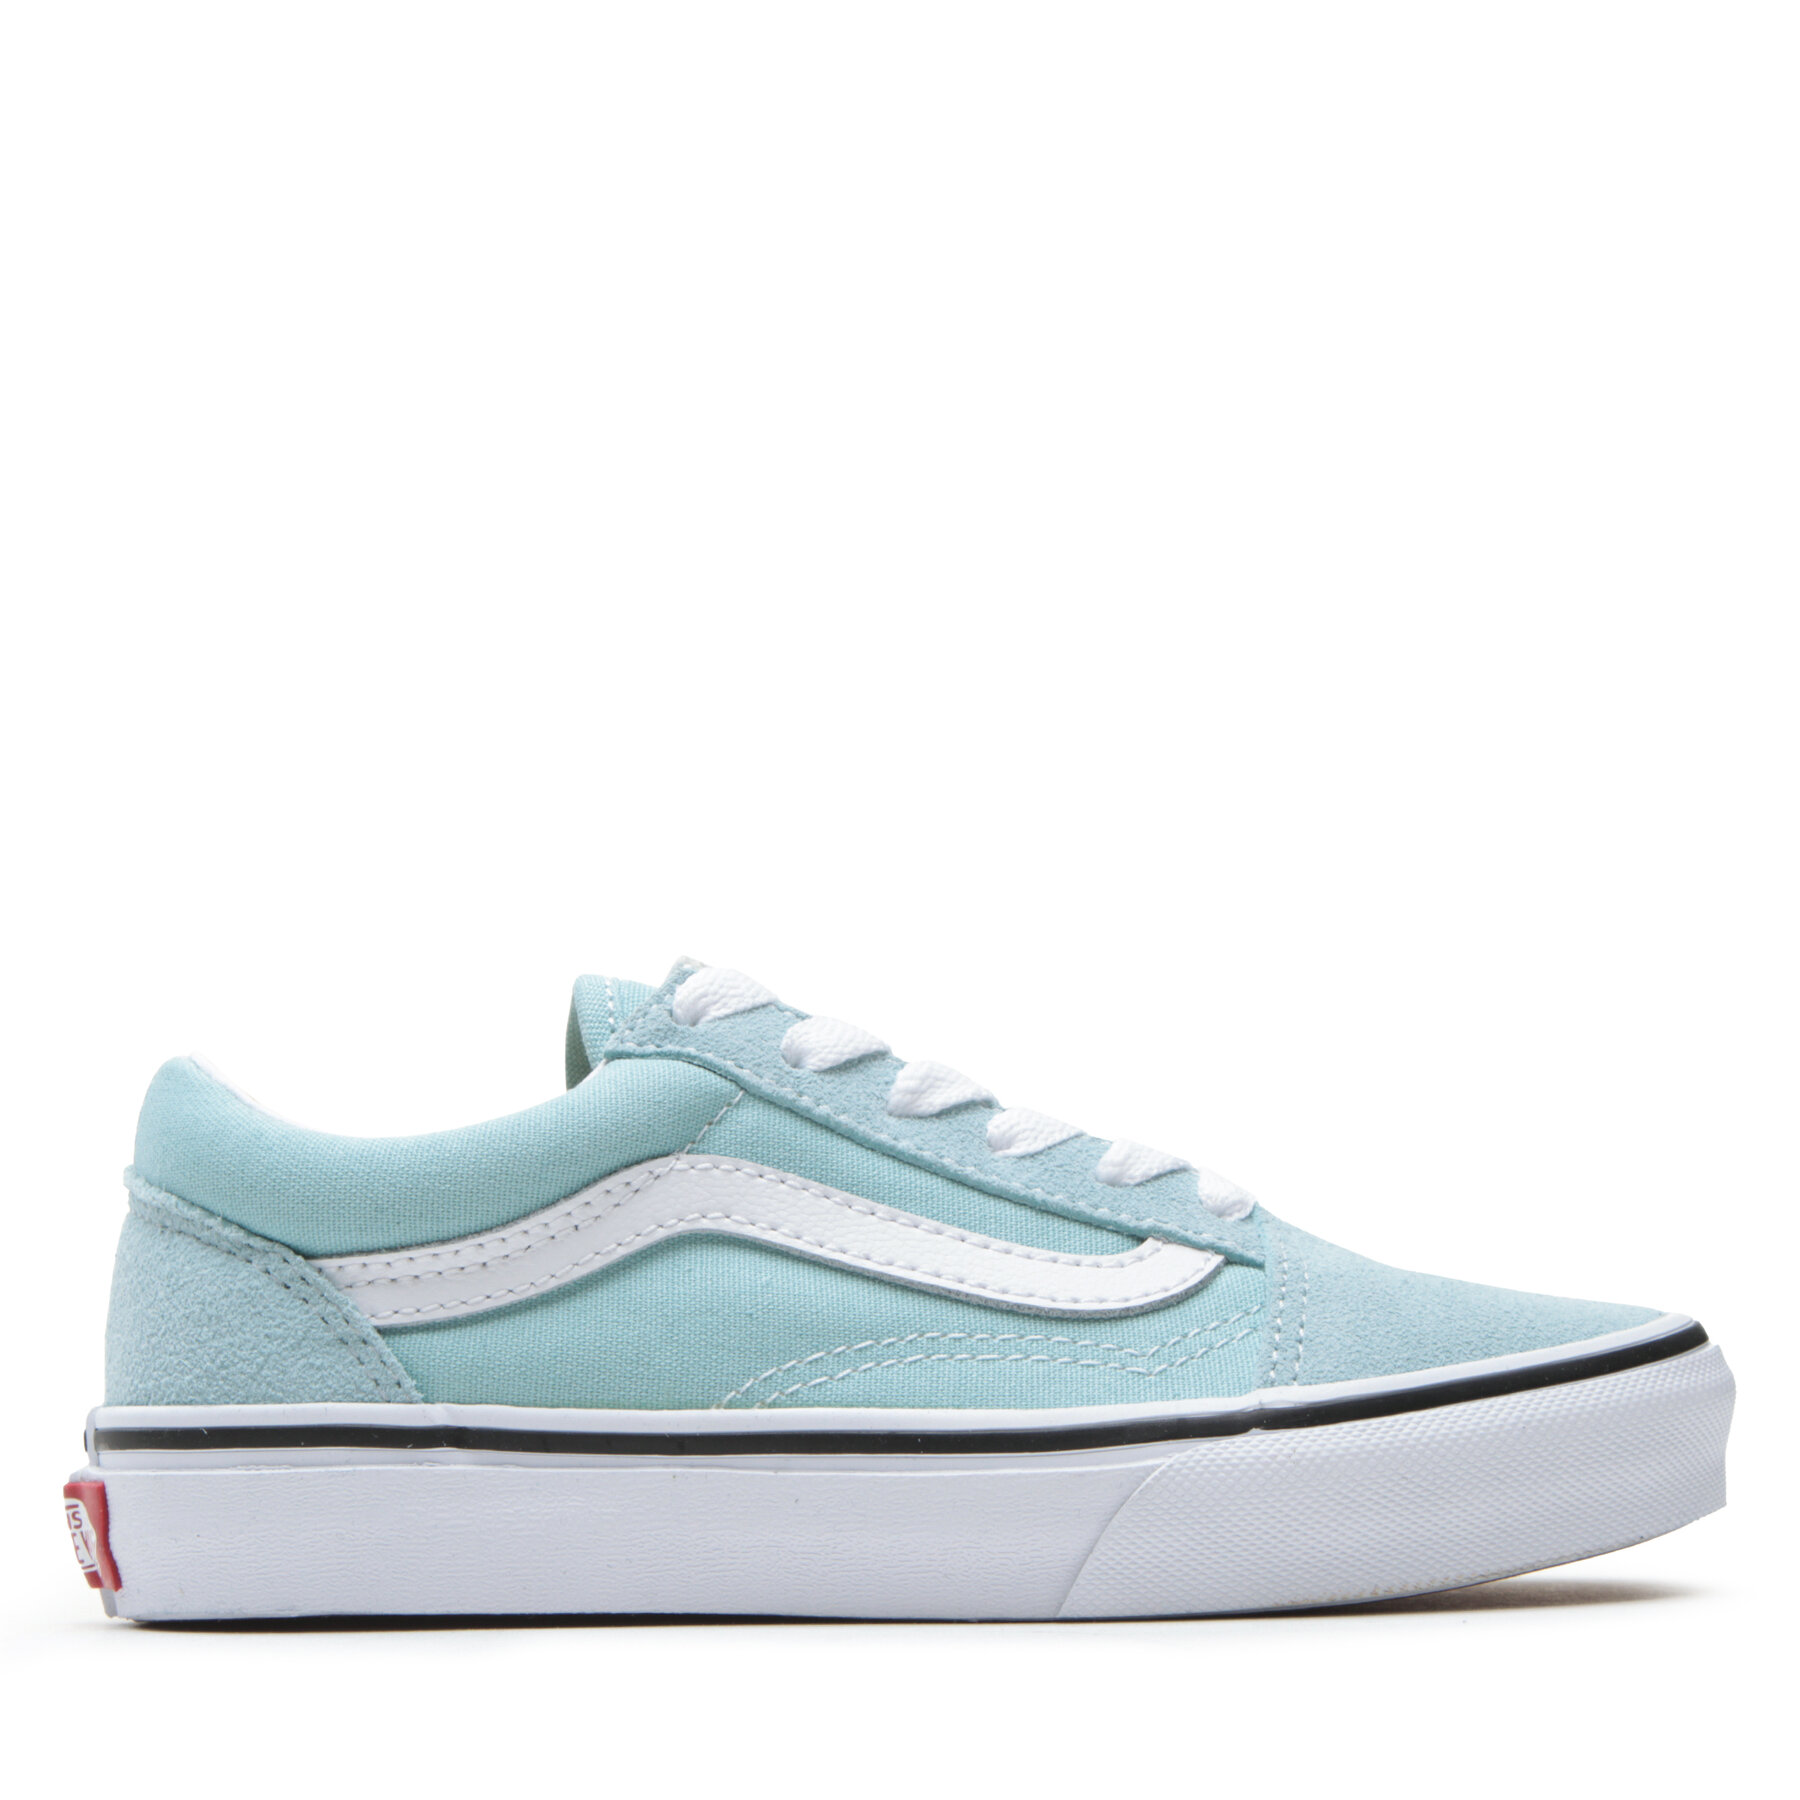 Sneakers aus Stoff Vans Old Skool VN0A7Q5FH7O1 Color Theory Canal Blue von Vans